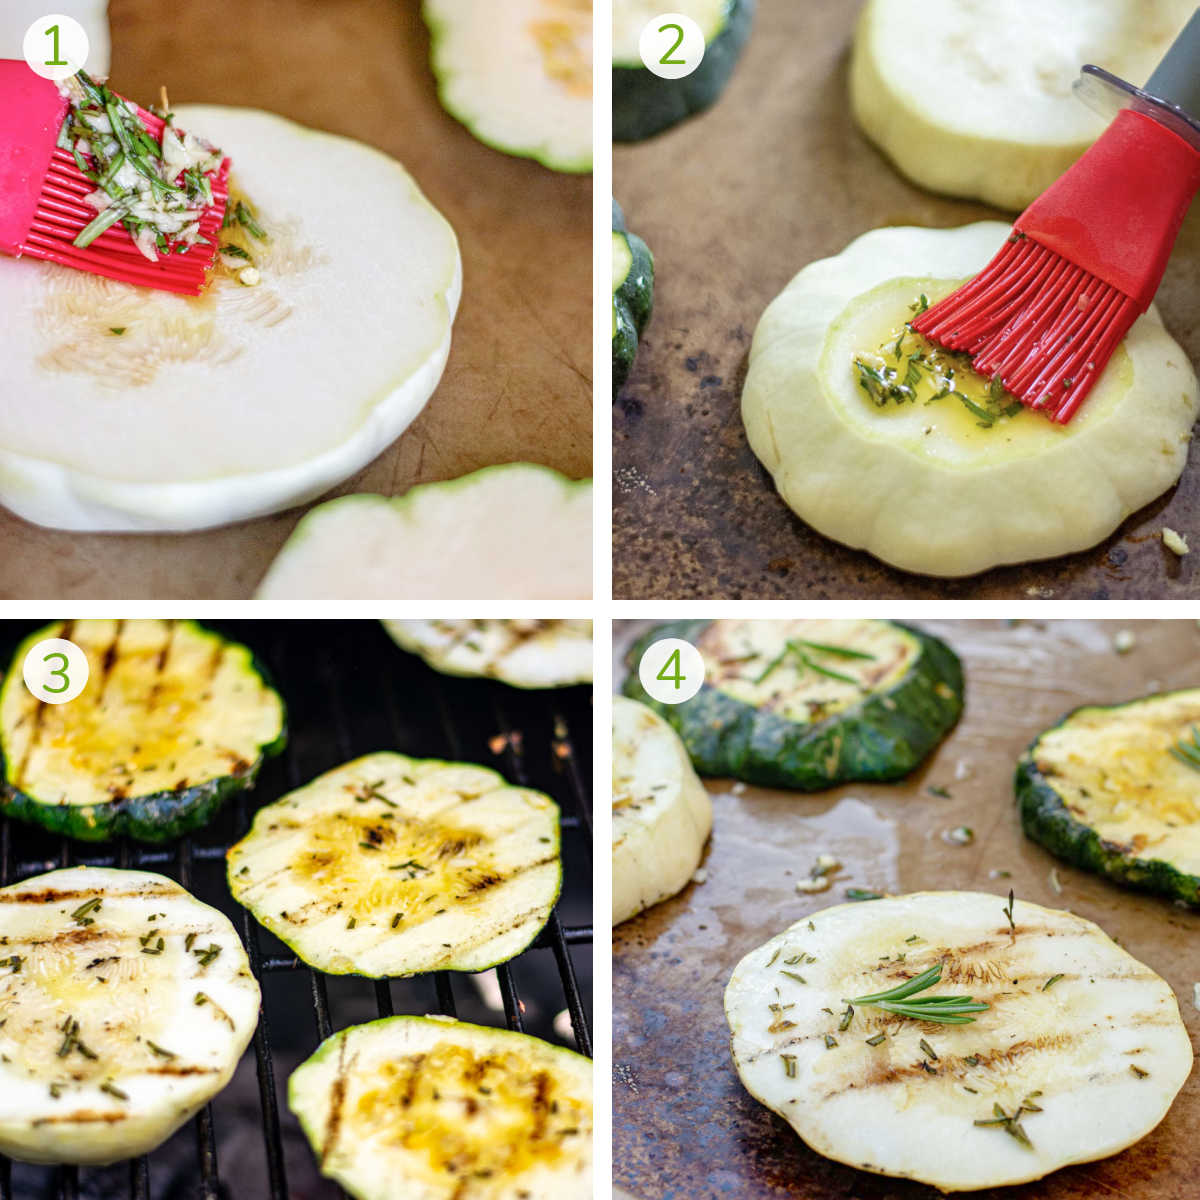 four photos show the instructions to brush the squash, placing it on the grill and then serving.